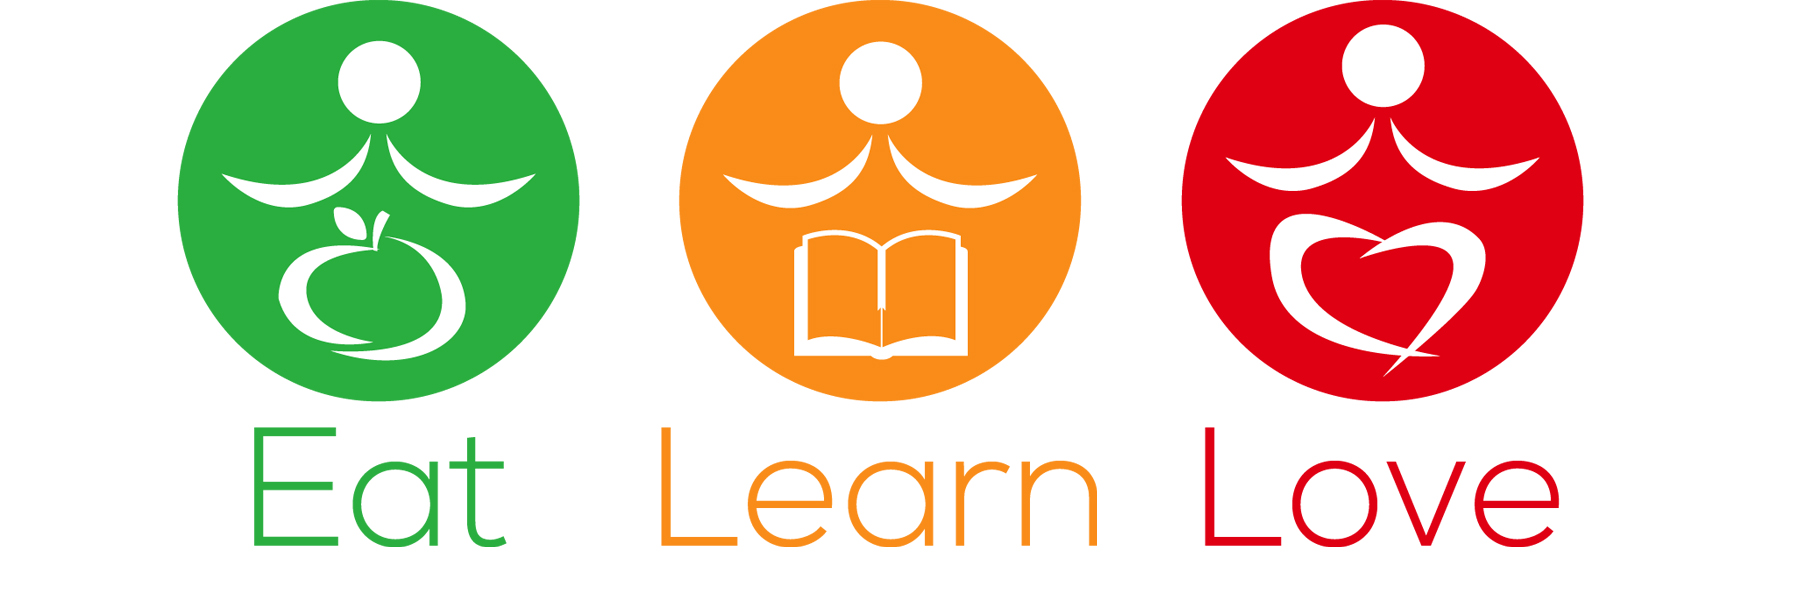 eat-learn-love-logo-with-text